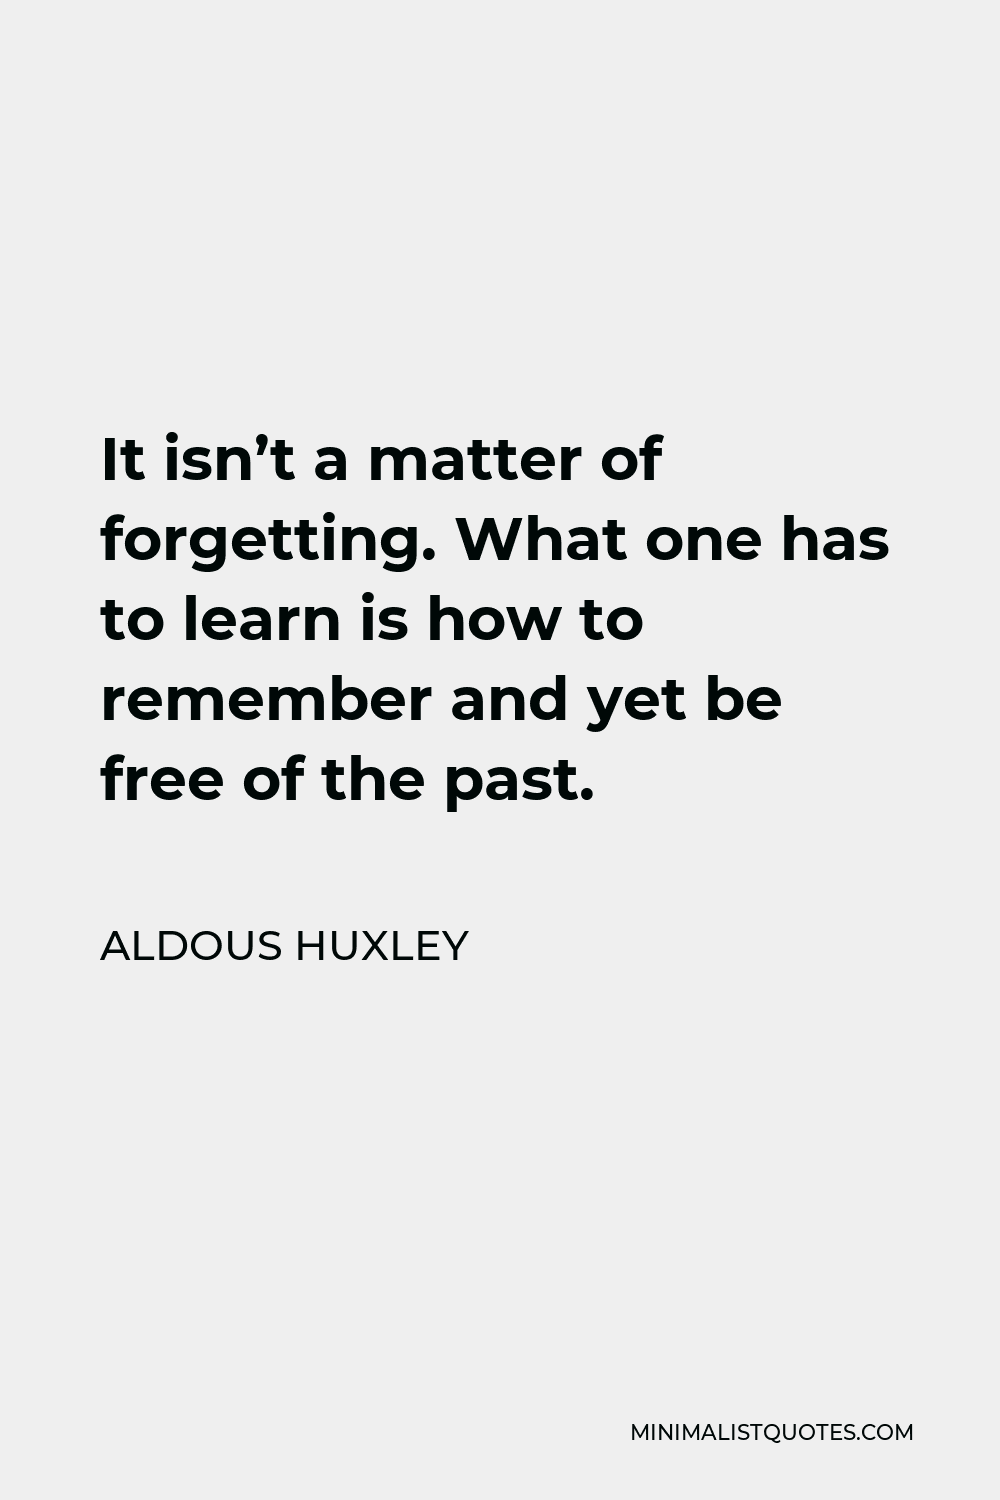 Aldous Huxley Quote - It isn’t a matter of forgetting. What one has to learn is how to remember and yet be free of the past.